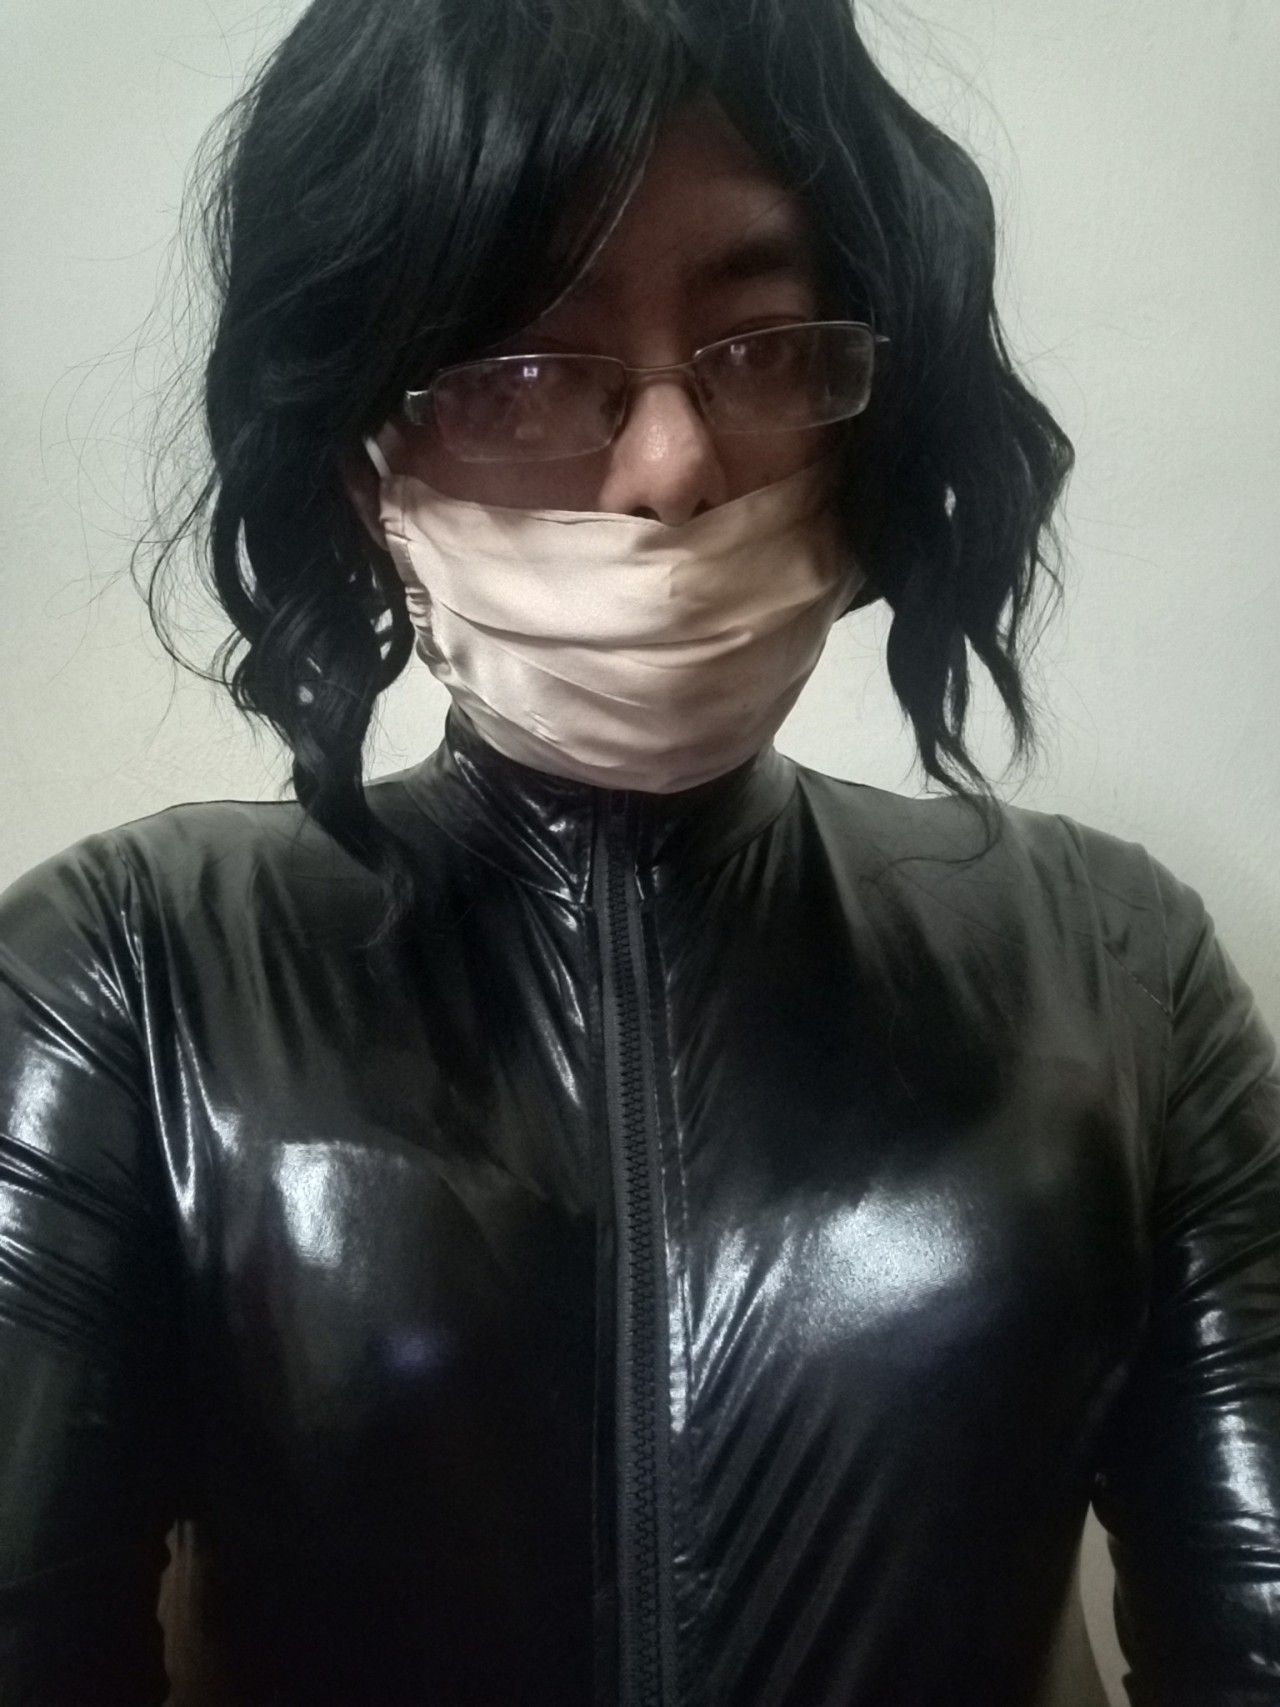 byulu:A mysterious figure busted me out of satin prison. As an exchange, she hired me as a cat burglar…This catsuit doesn’t even have pockets. How am I going to carry stuff?There’s a huge possibility that I’ll get rearrested,